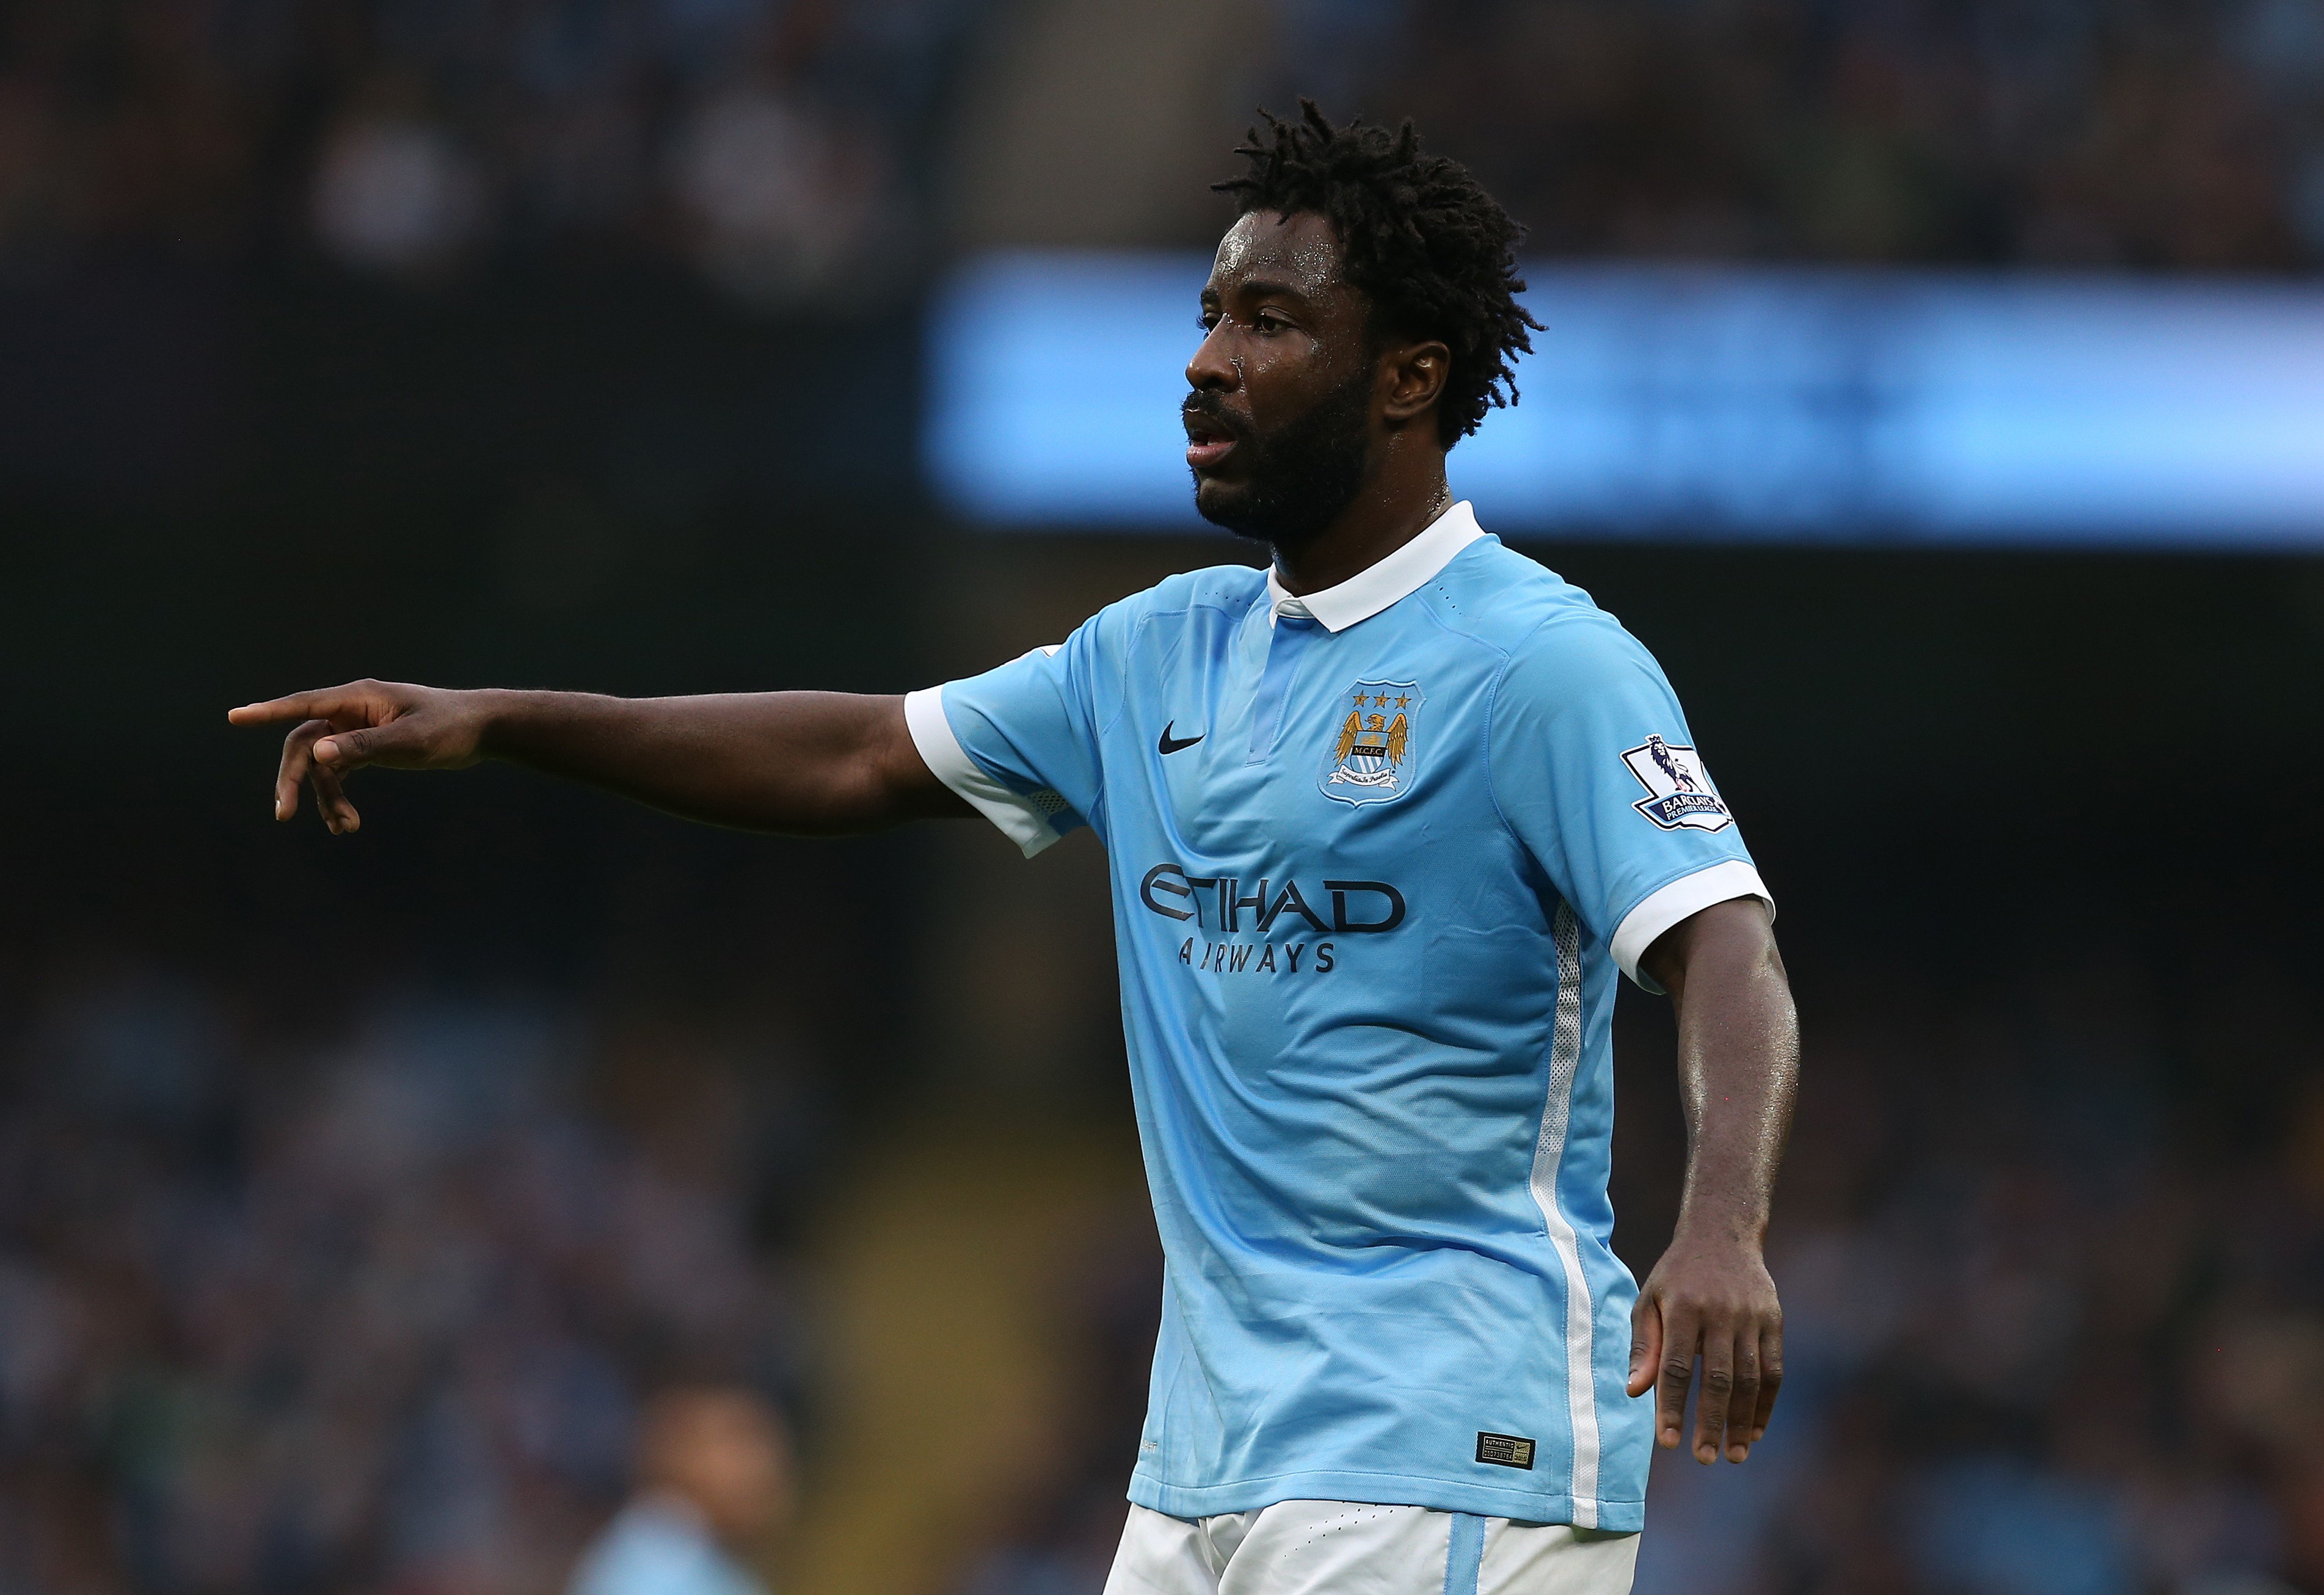 Without Sergio Aguero available, Wilfried Bony will be needed up top for City. (Getty)